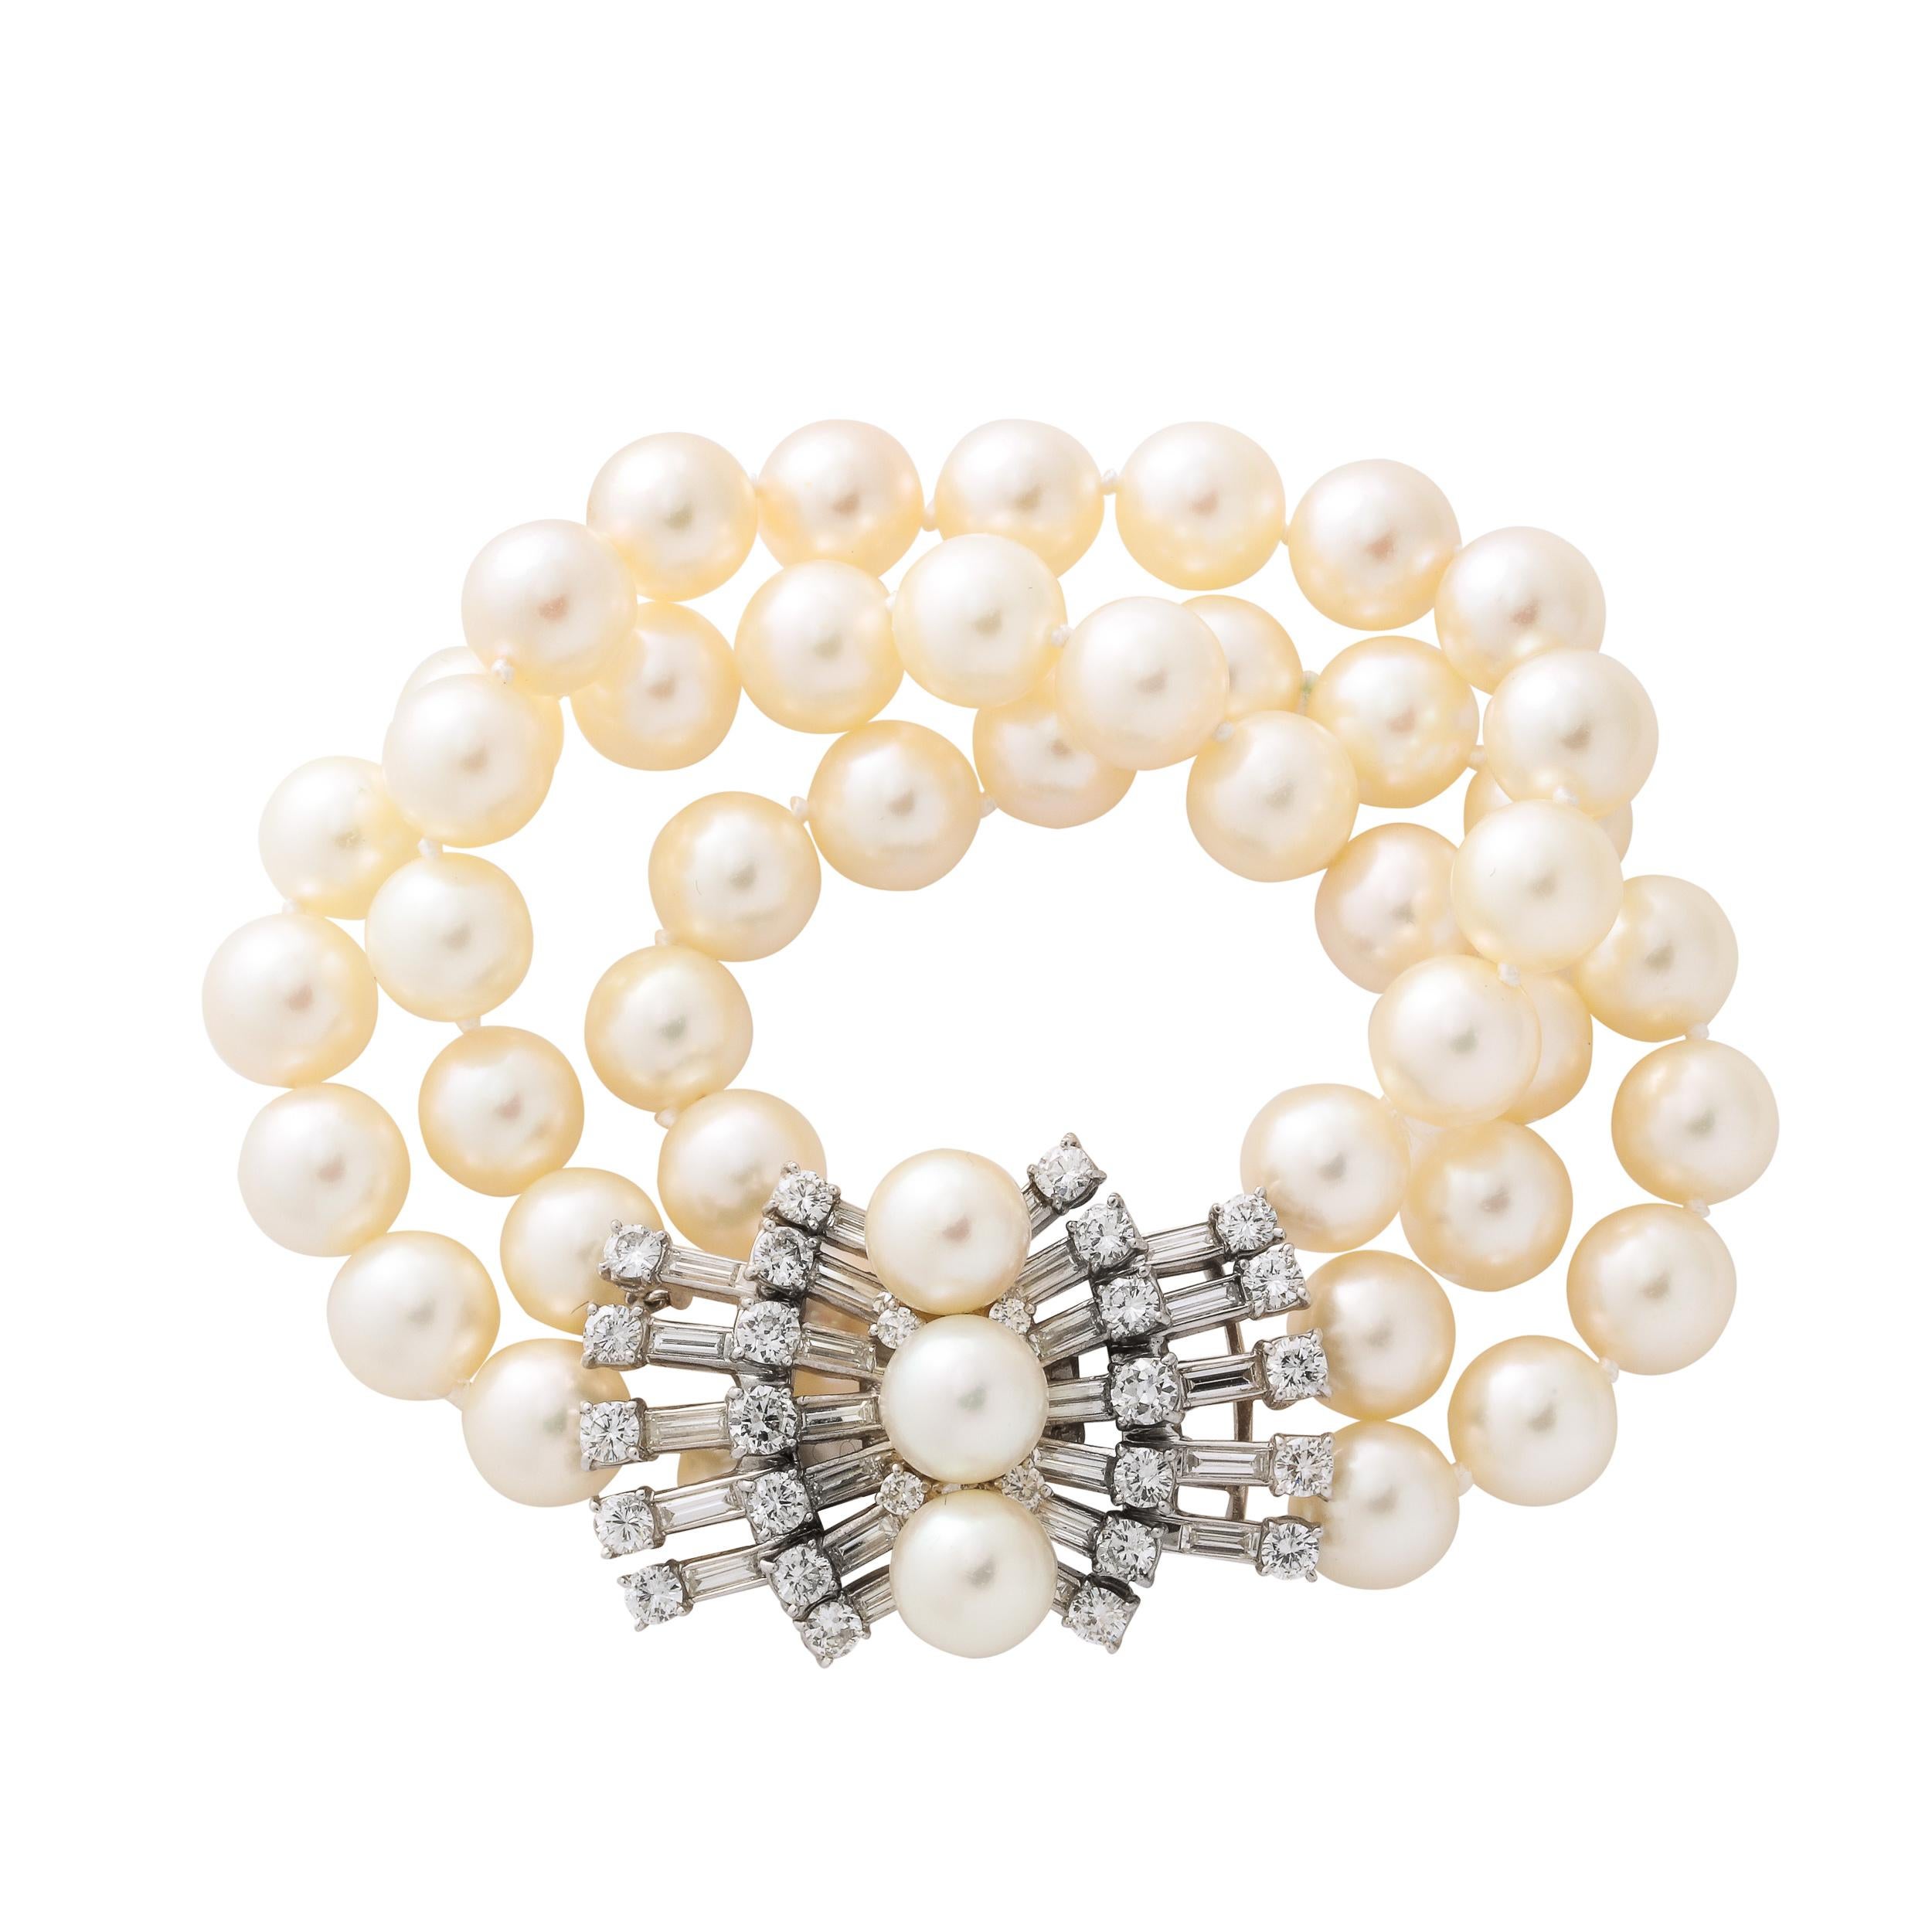 Hailing from the estate of Pauline Ireland and designed by the illustrious Marianne Ostier, this gorgeous triple strand cultured pearl bracelet terminates in a dramatic diamond clasp. Set in platinum and 14kt white gold, the piece features 28 round